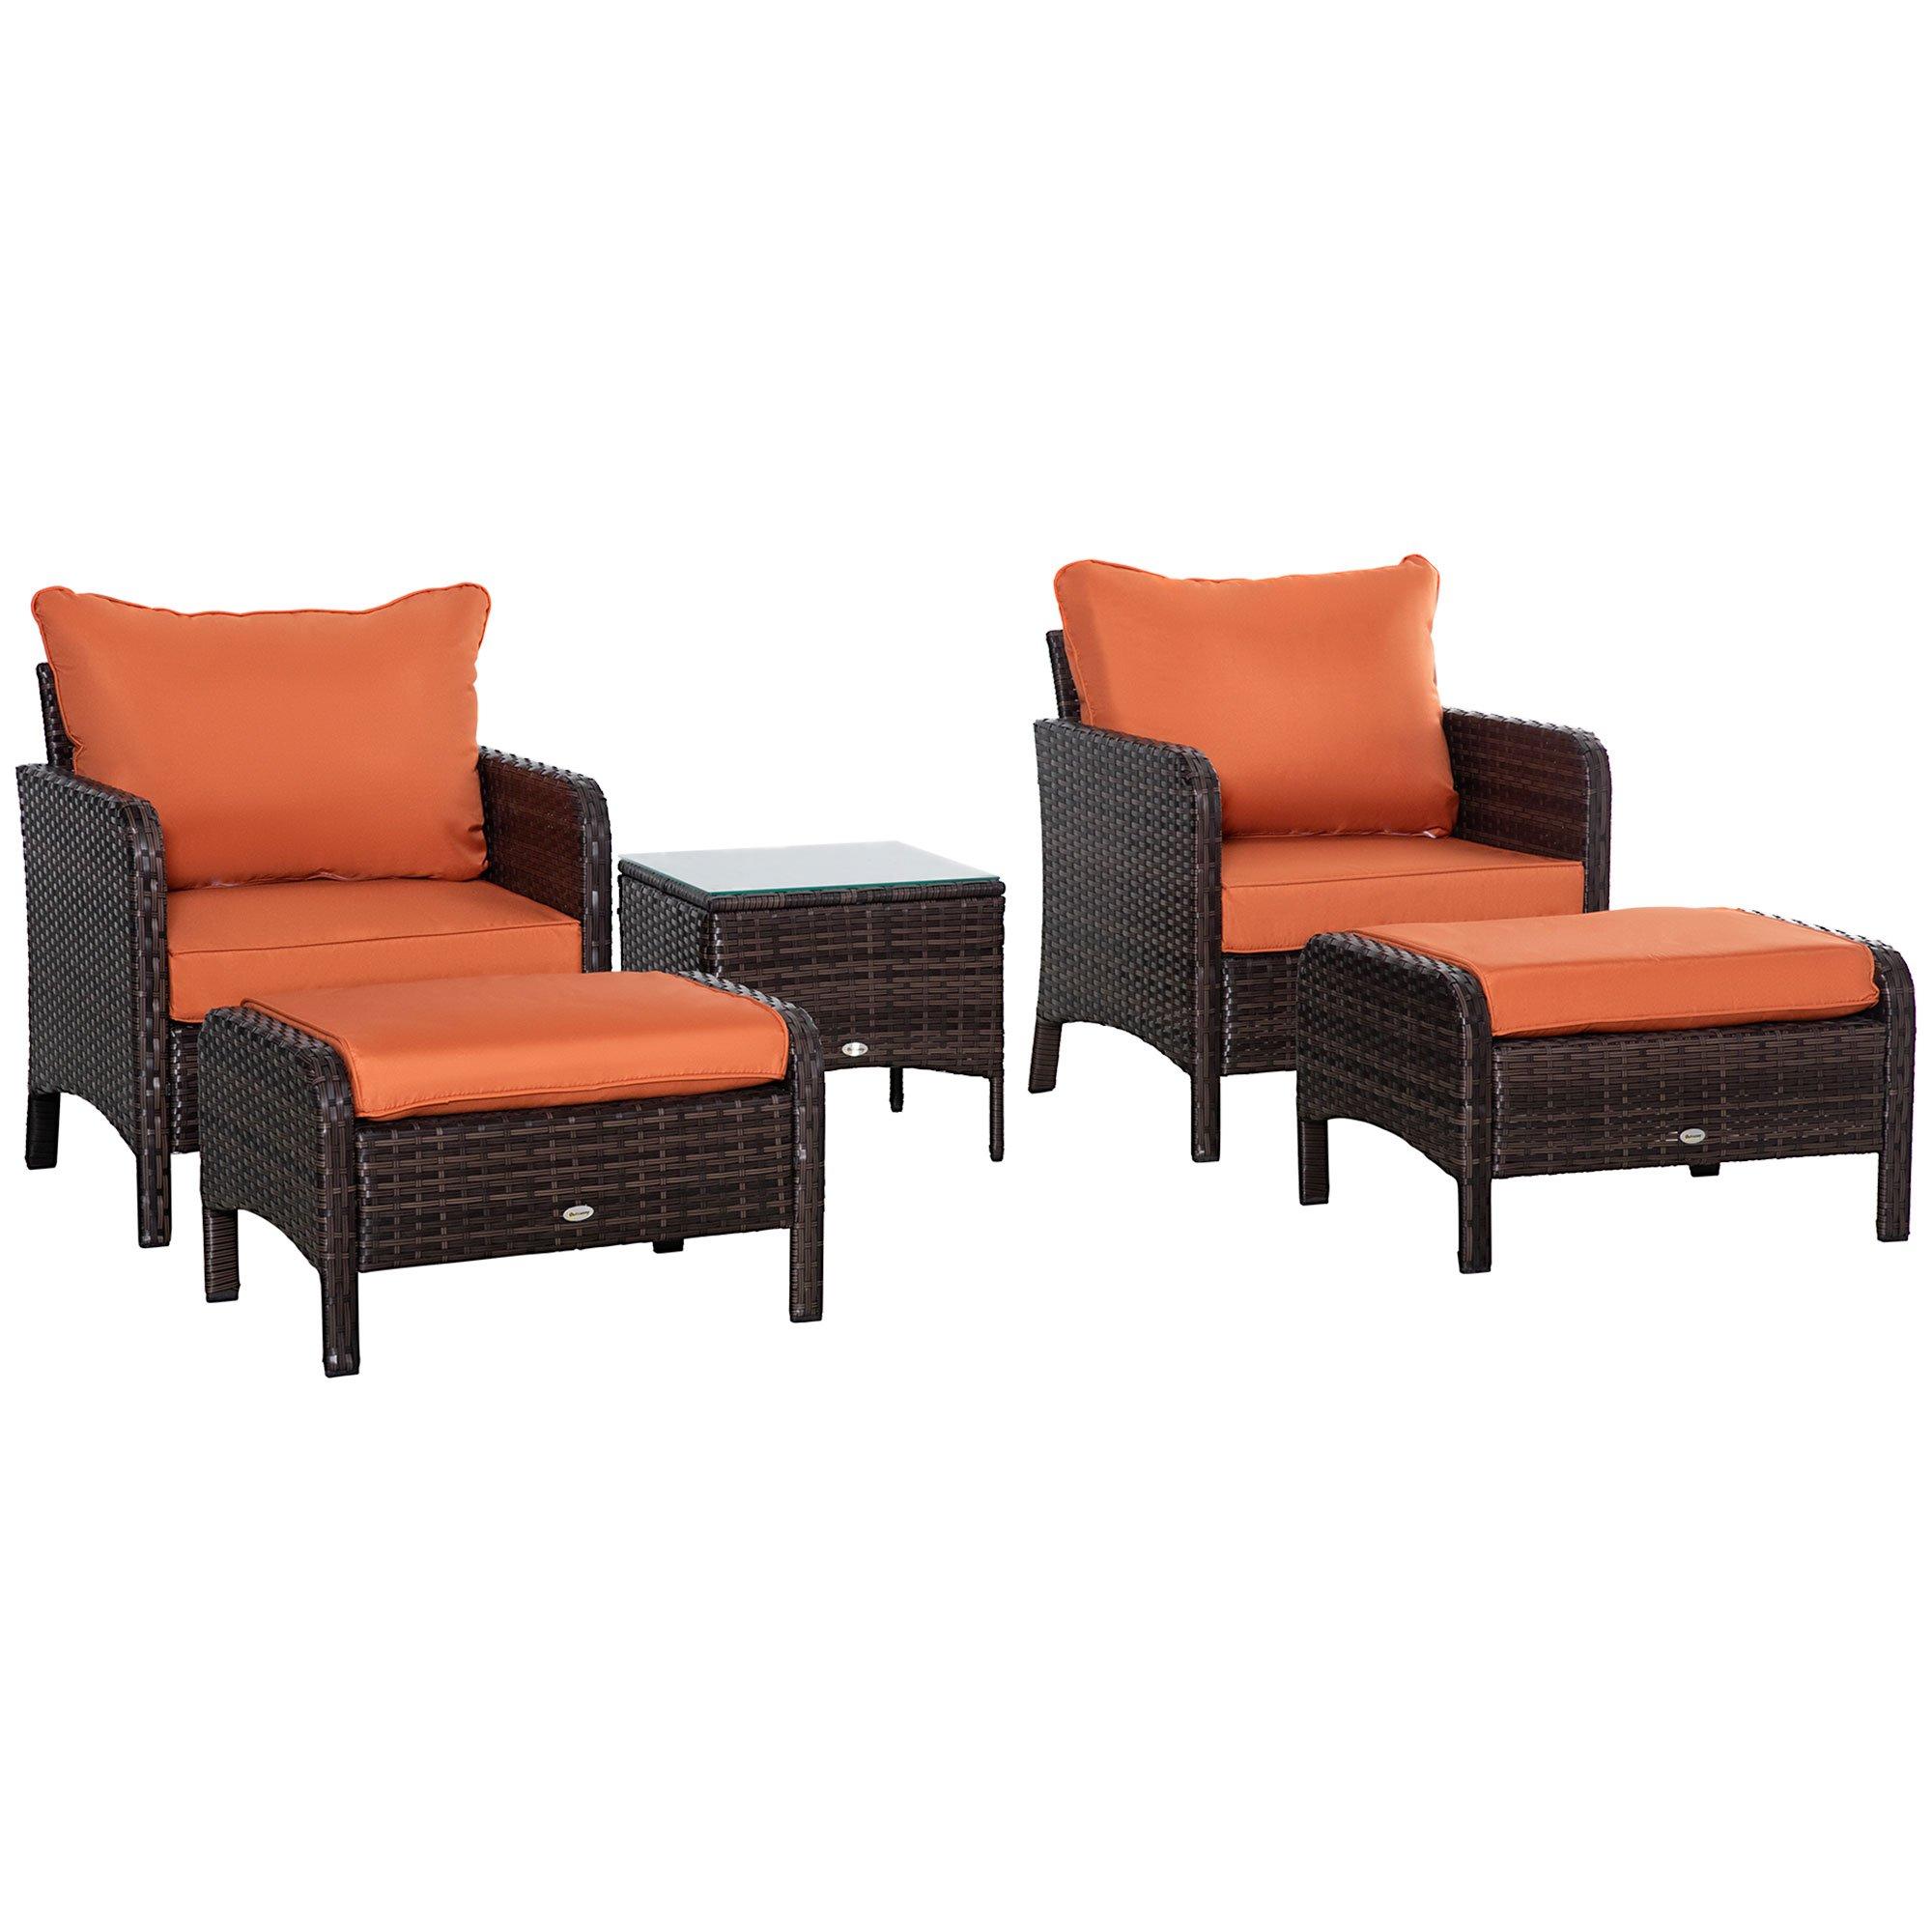 Outsunny  5pcs Outdoor Furniture Set Wicker Conversation Set Brown